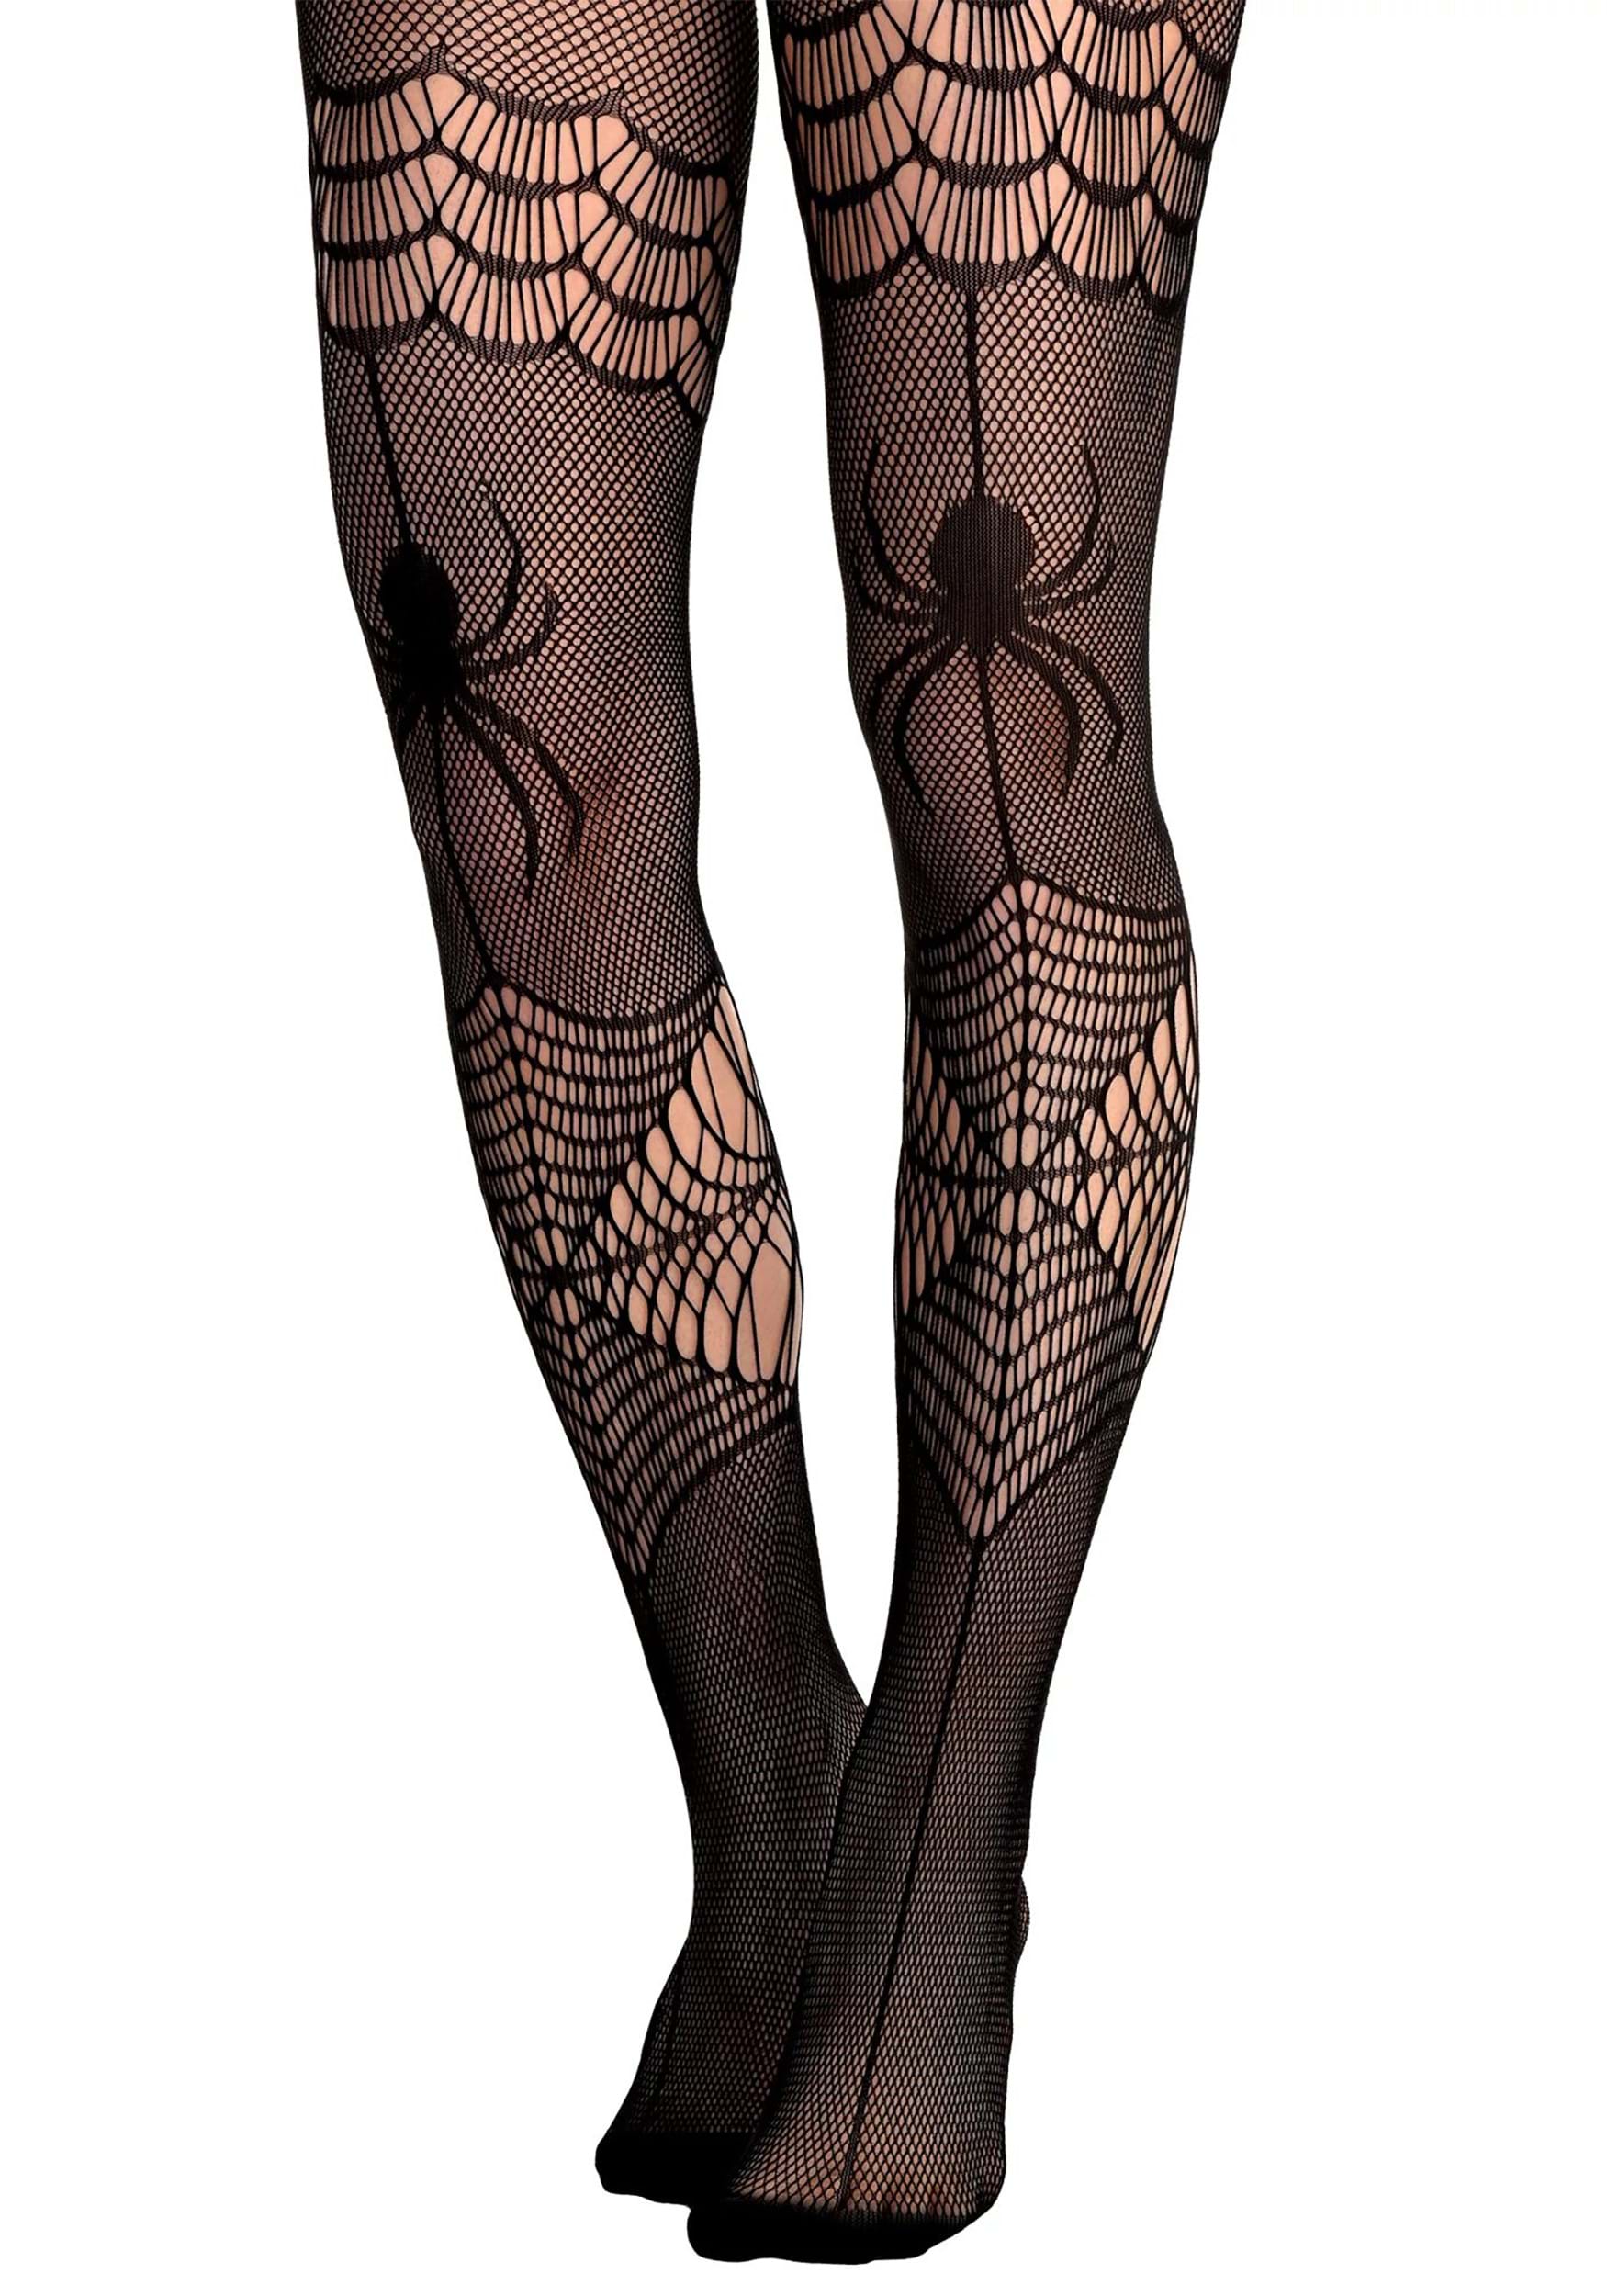 Spiderweb tights Vectors & Illustrations for Free Download